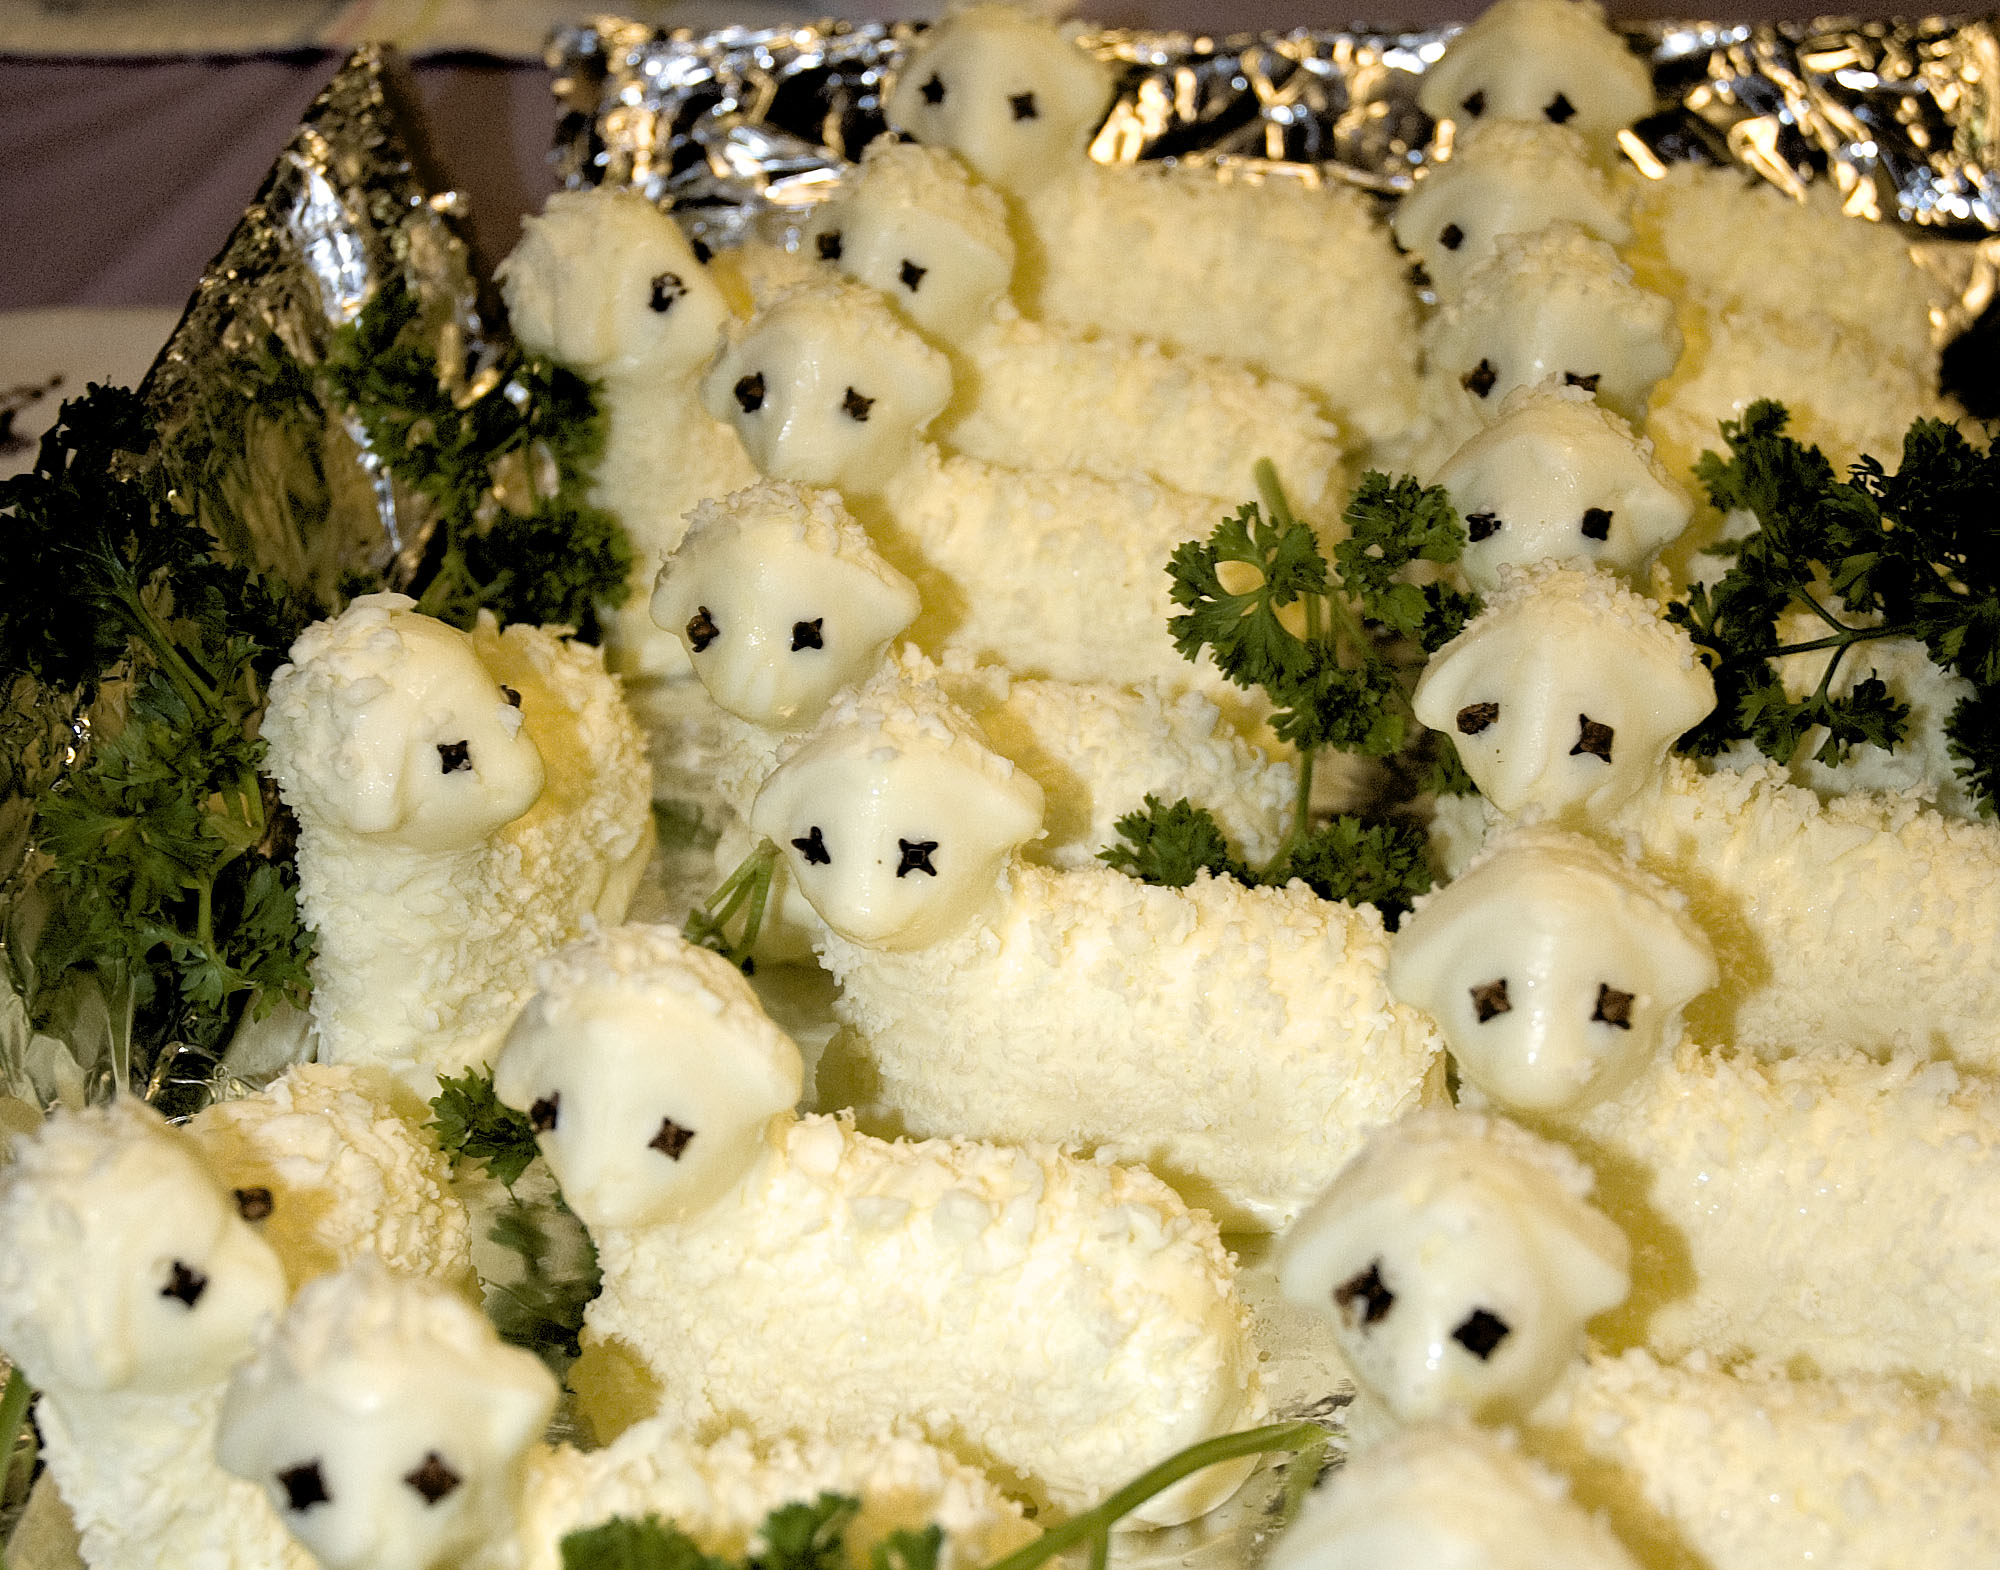 Foil lined container holding butter lambs with clove eyes.